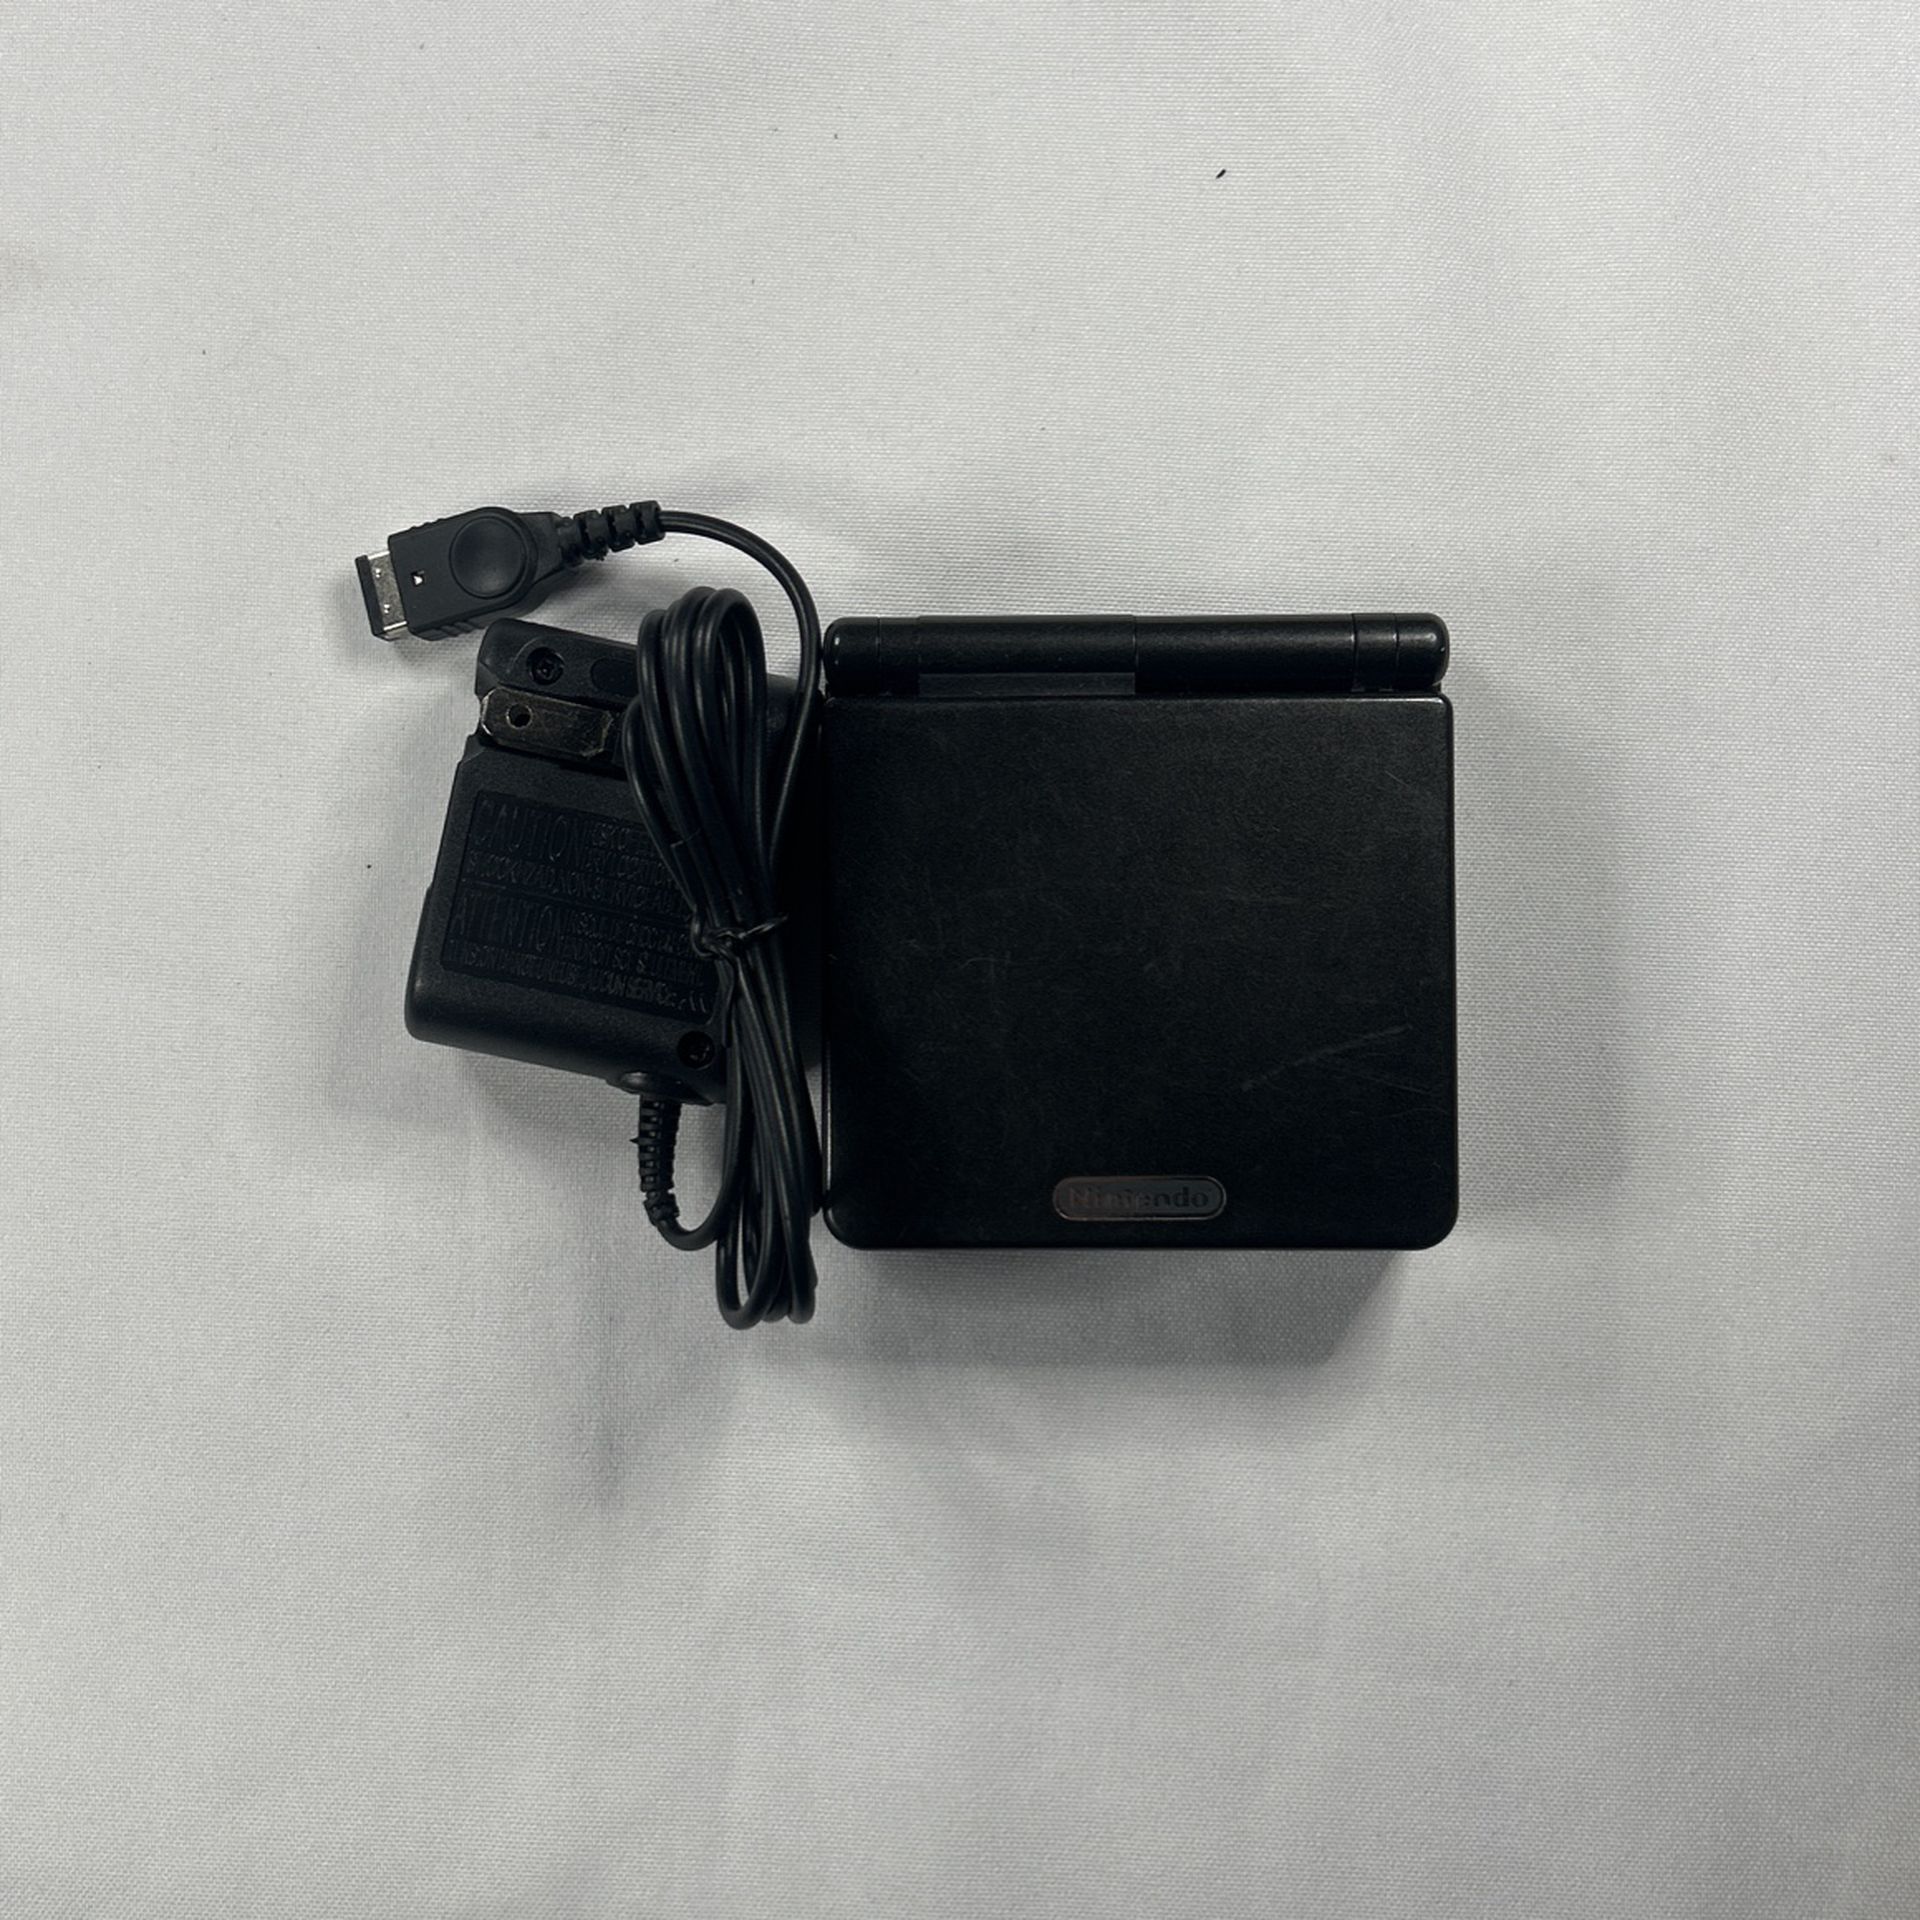 Nintendo Gameboy Advance SP W/Charger